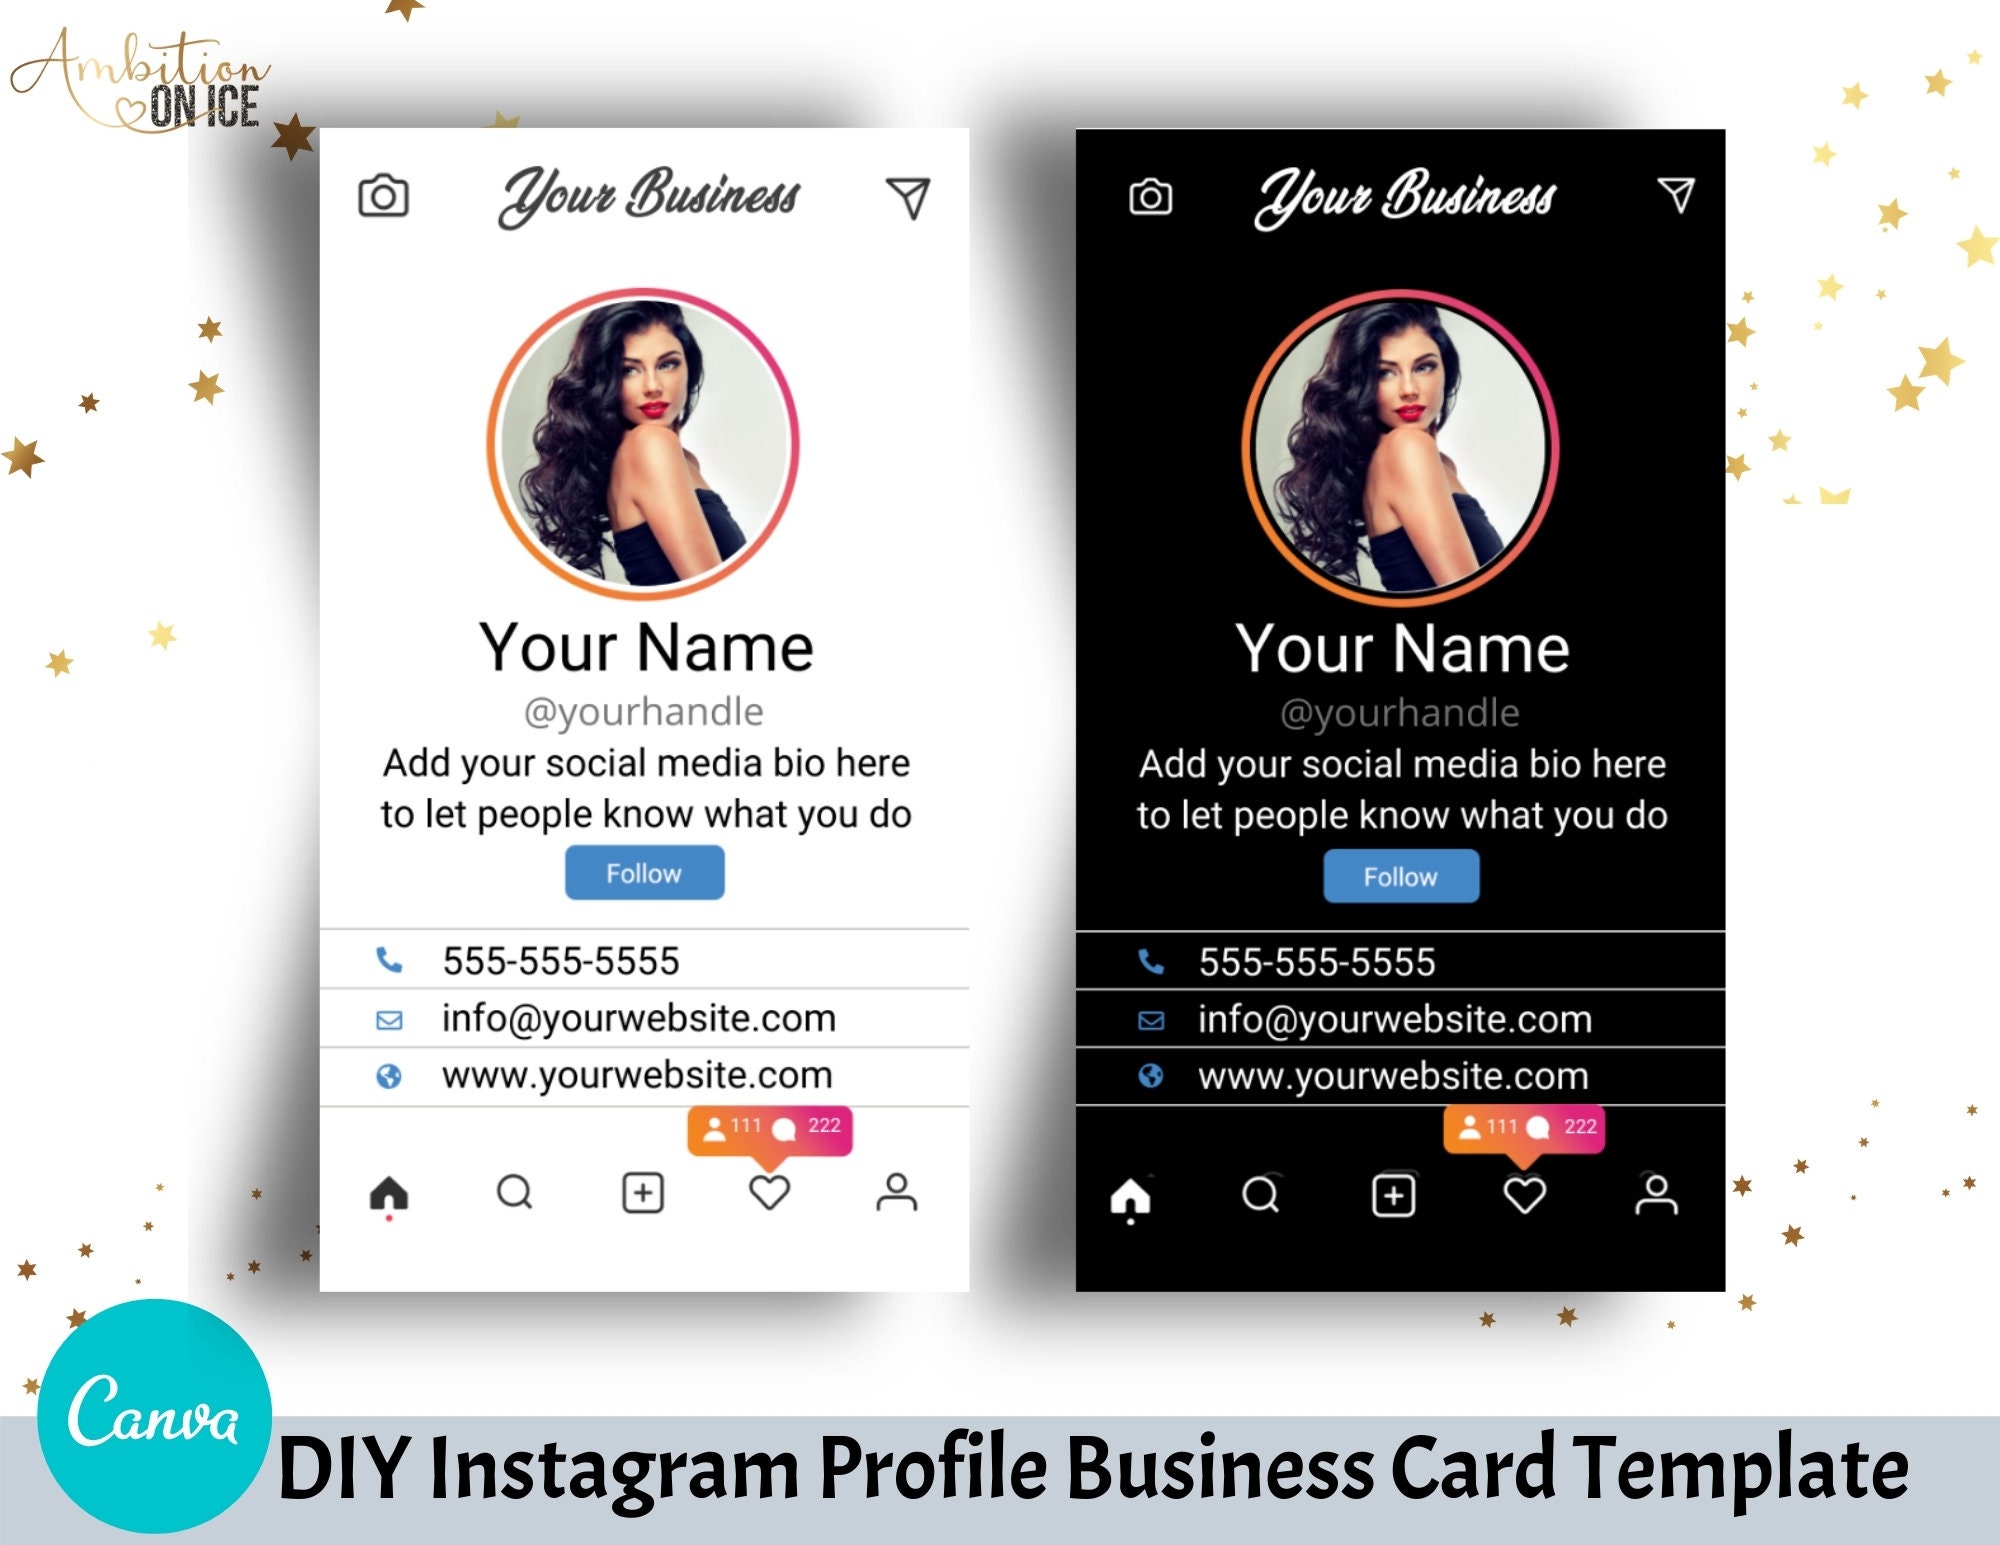 diy-instagram-profile-business-cards-canva-template-business-etsy